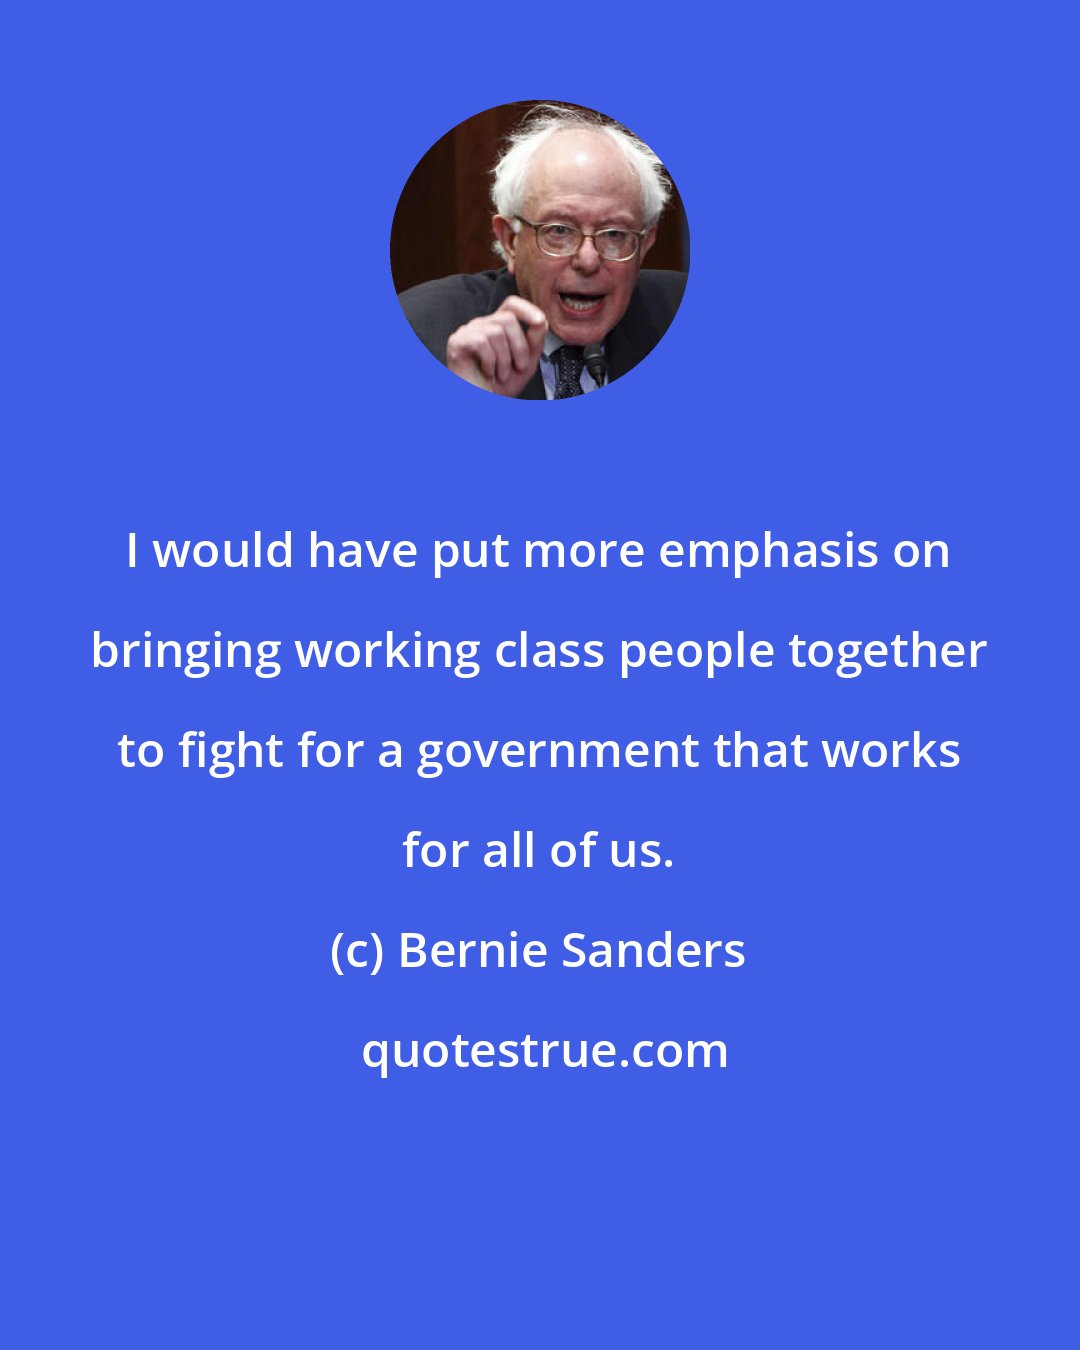 Bernie Sanders: I would have put more emphasis on bringing working class people together to fight for a government that works for all of us.